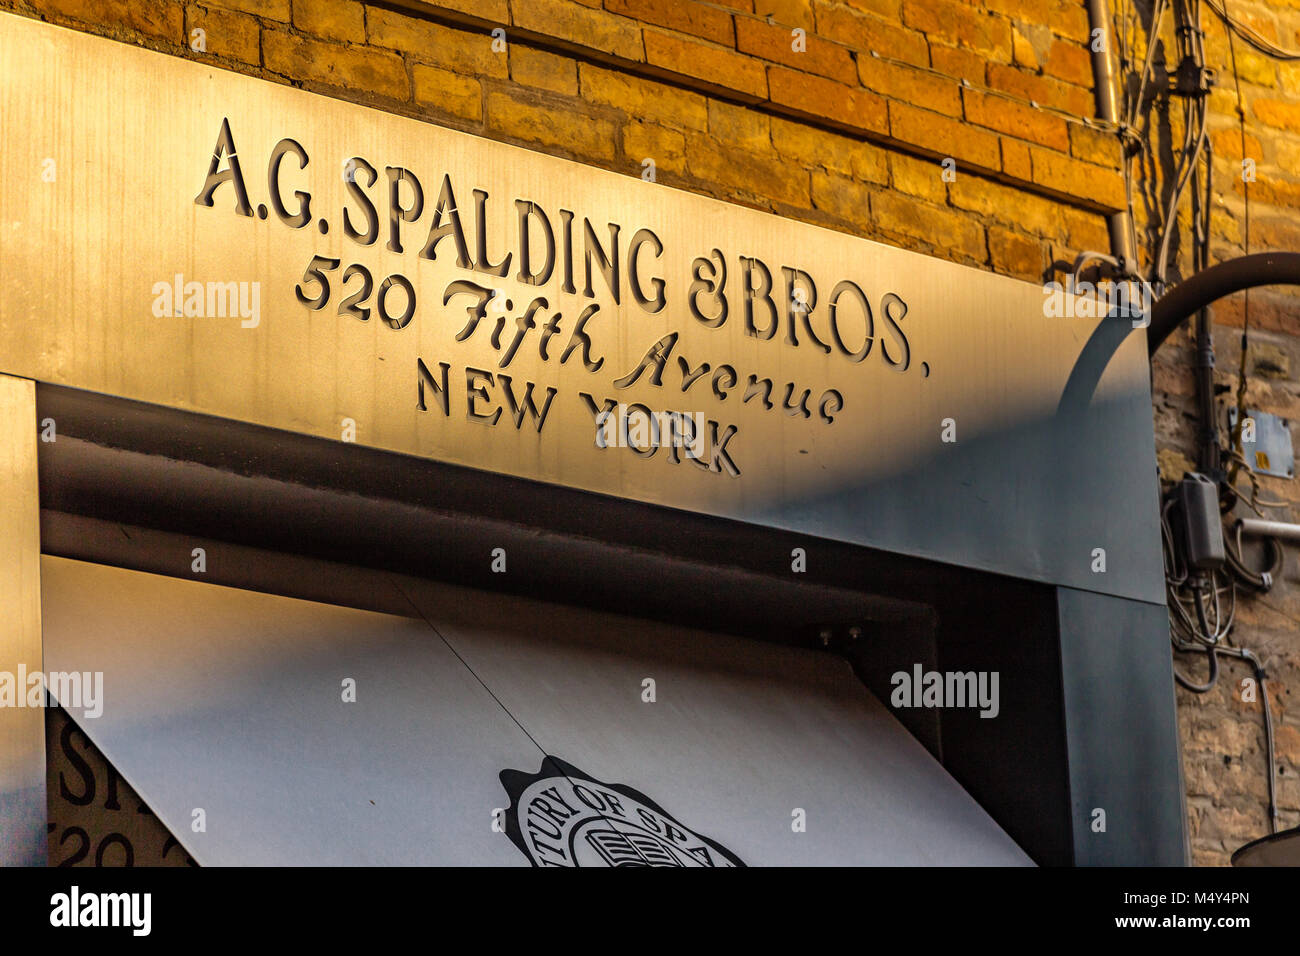 RAVENNA, ITALY - FEBRUARY 15, 2018: A.G. SPALDING AND BROS. sign of street shop. Spalding Sporting Goods Ltd owner of the brand granted license to Ita Stock Photo